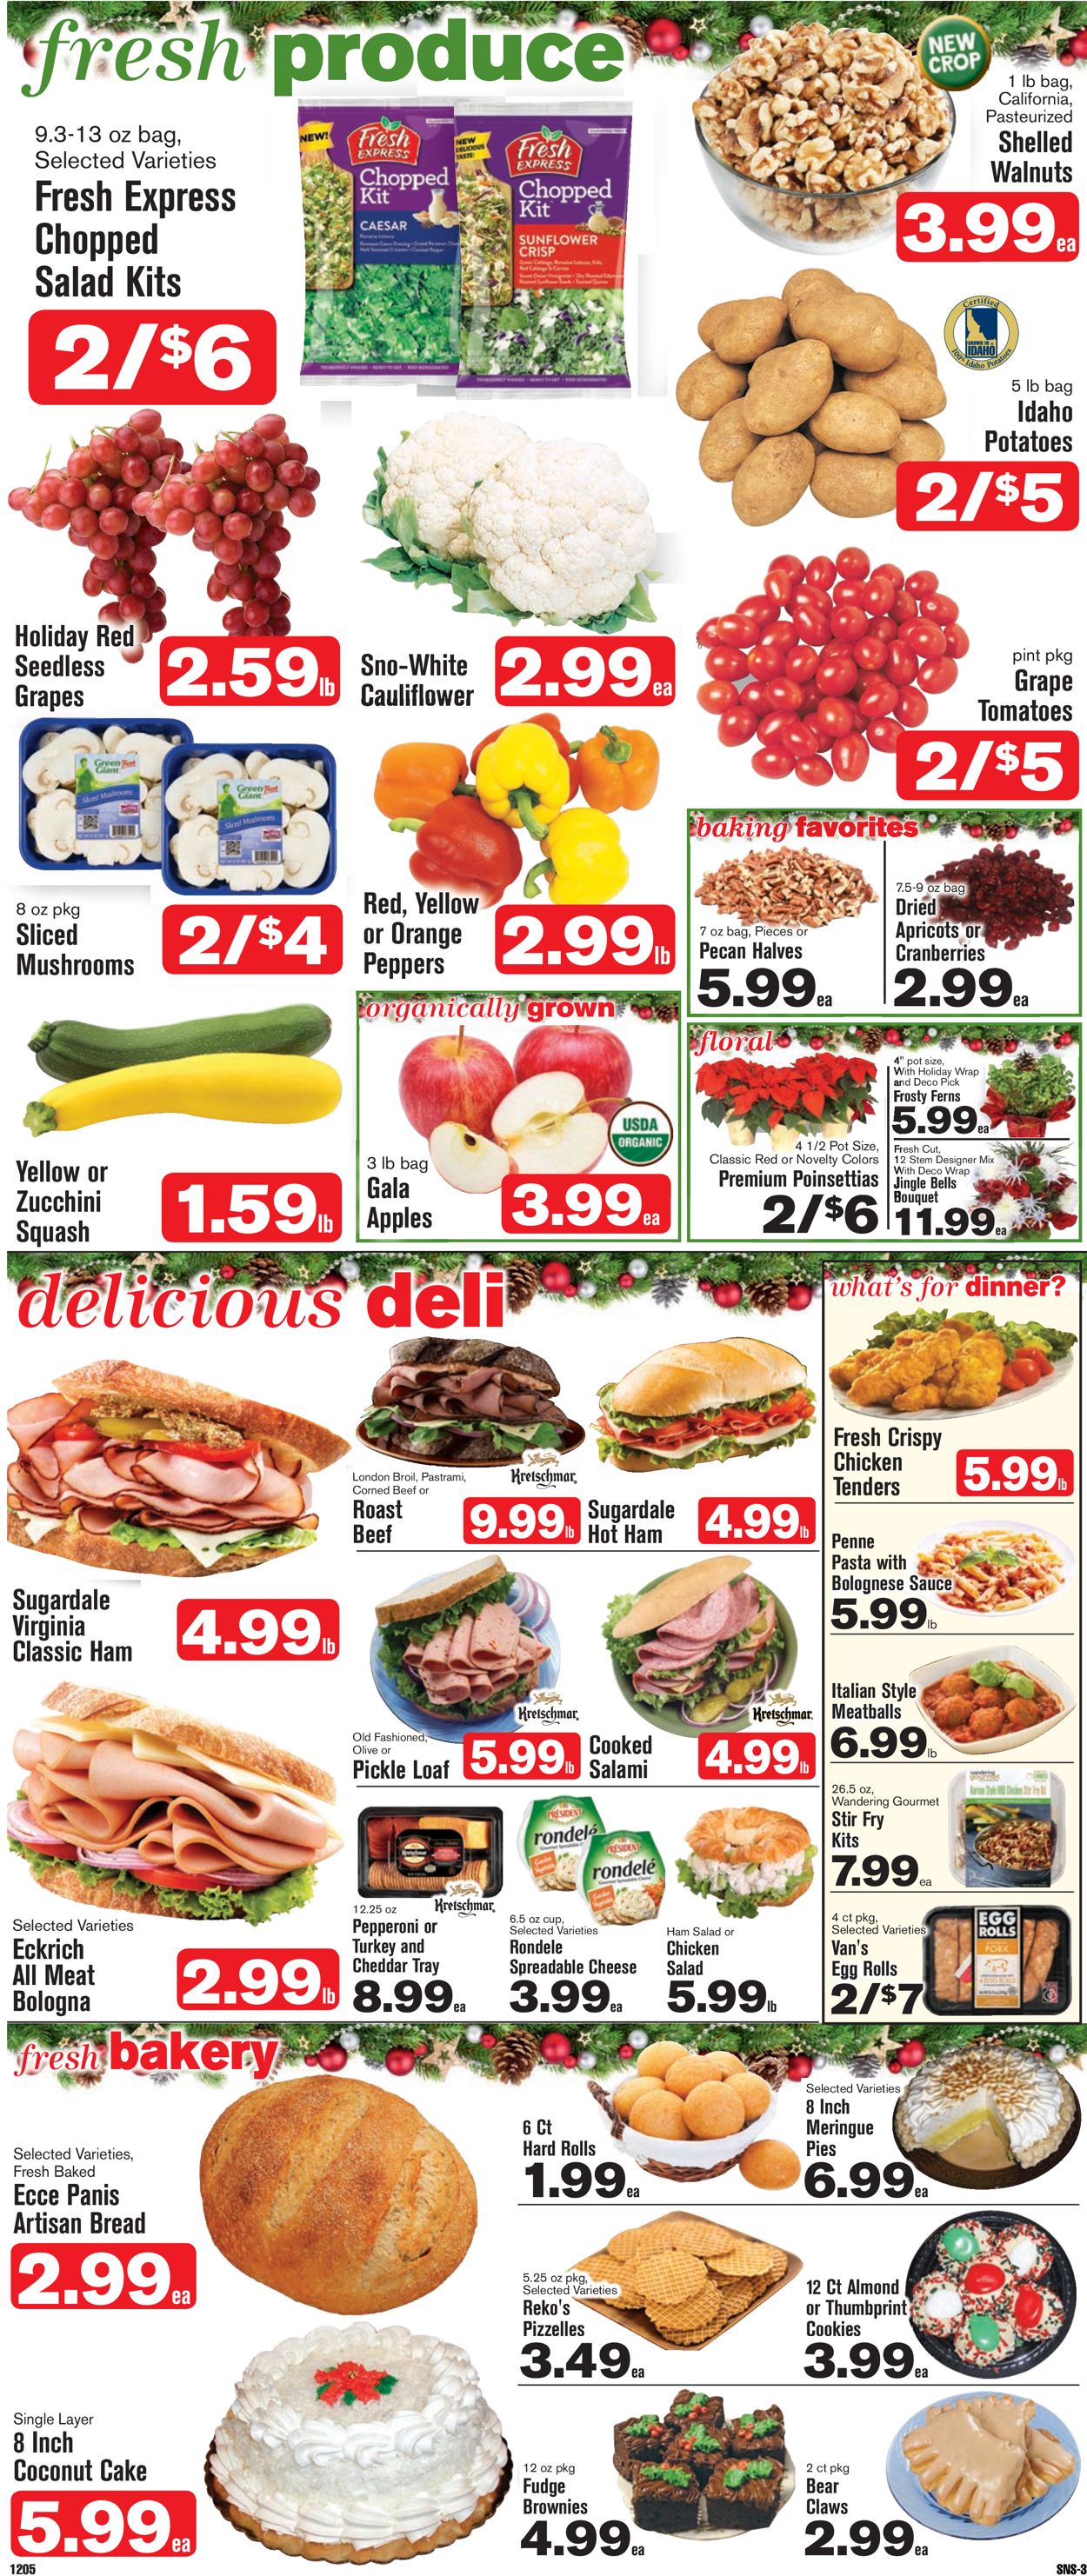 Shop ‘n Save (Pittsburgh) Ad from 12/05/2019